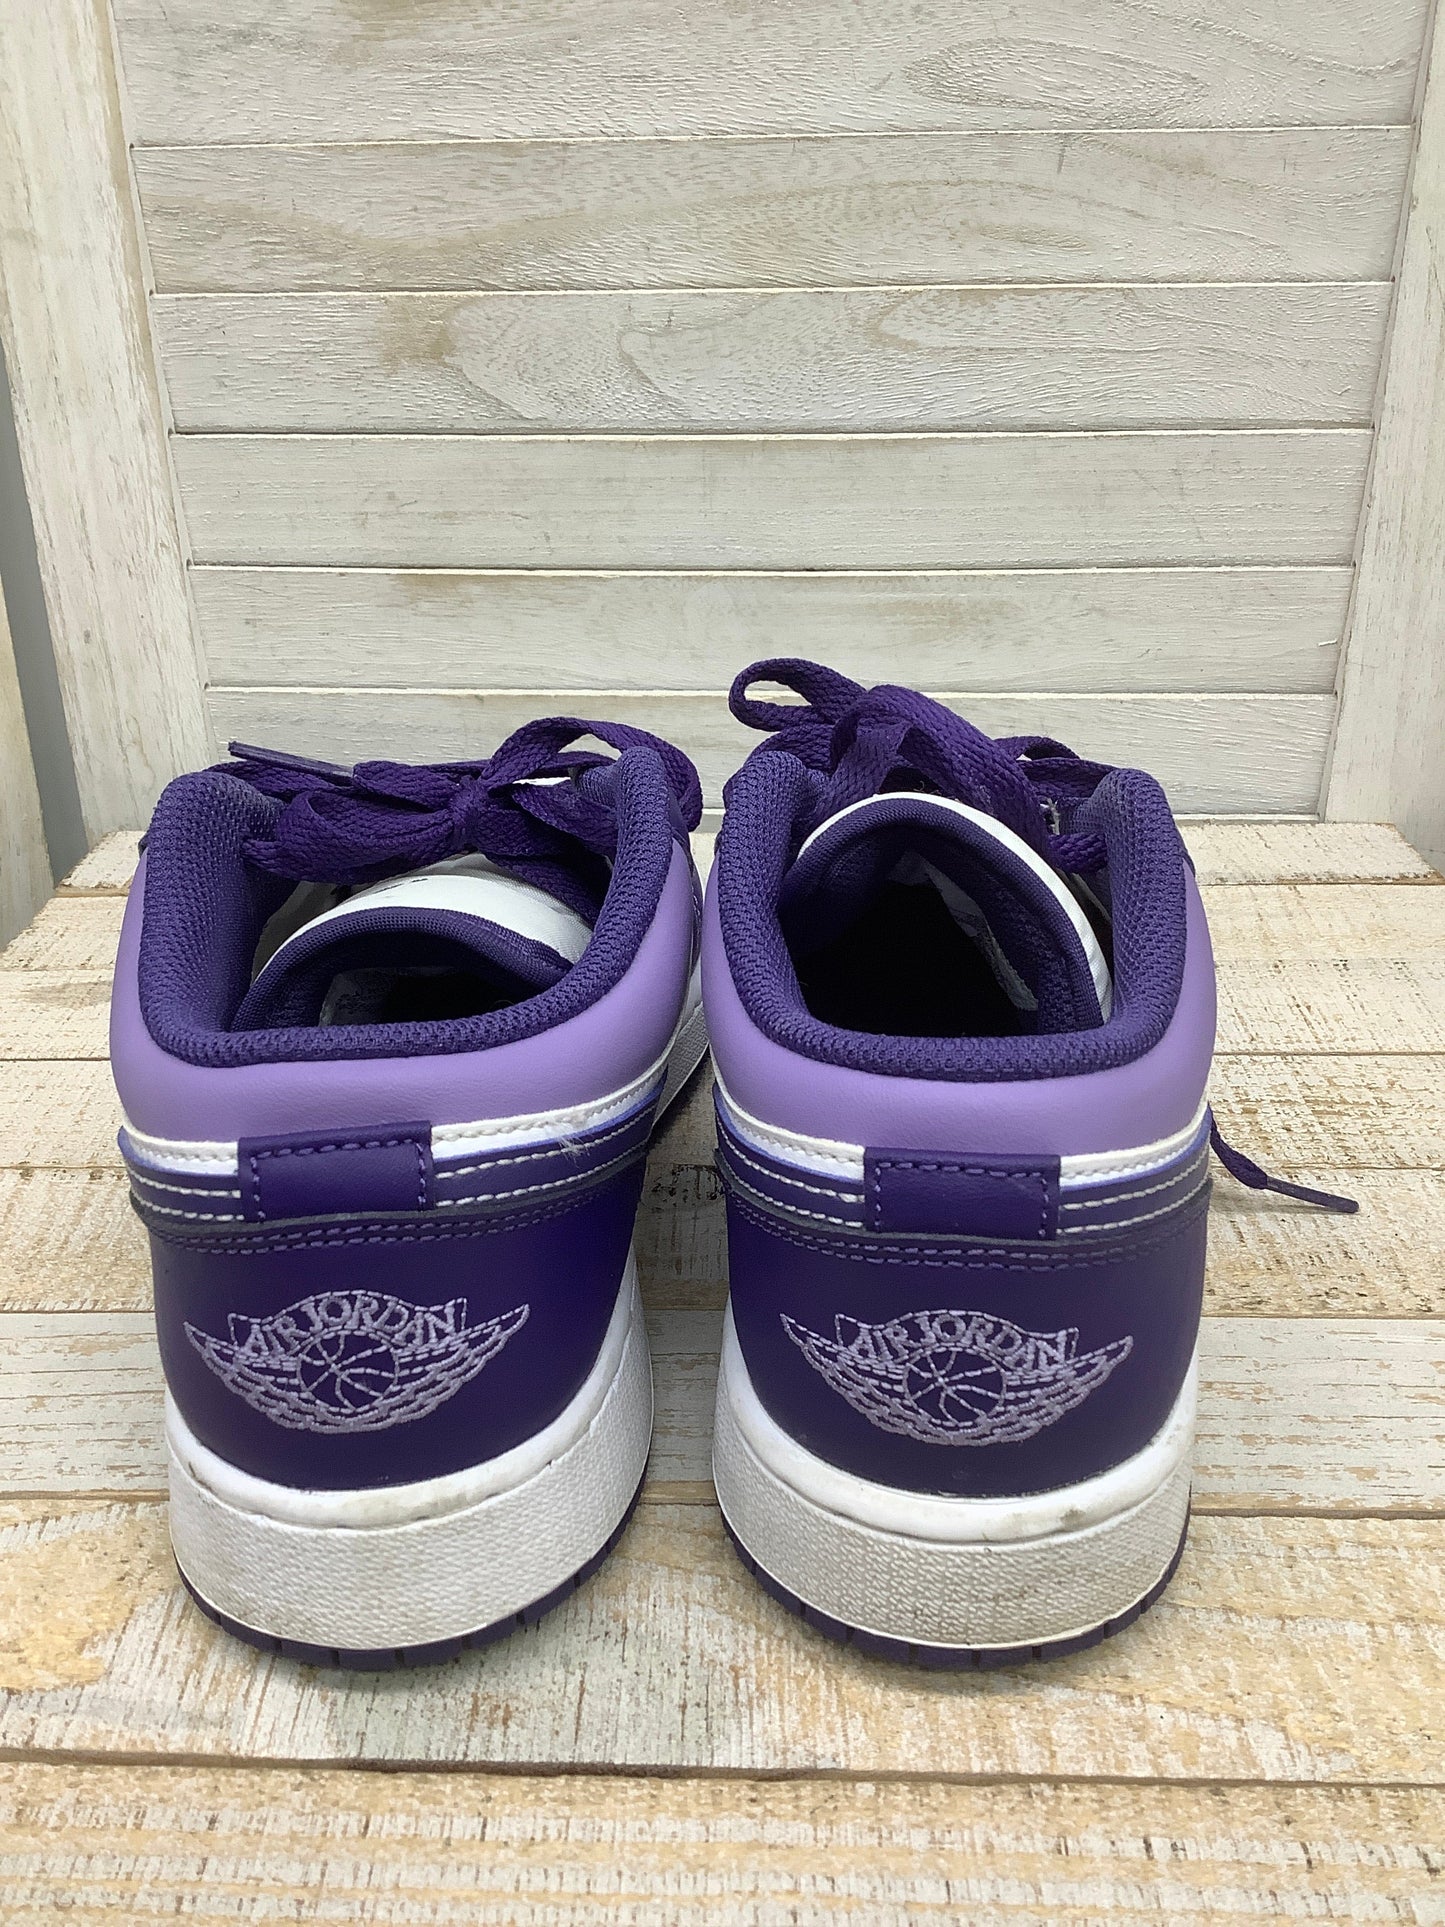 Purple & White Shoes Sneakers Nike, Size 8